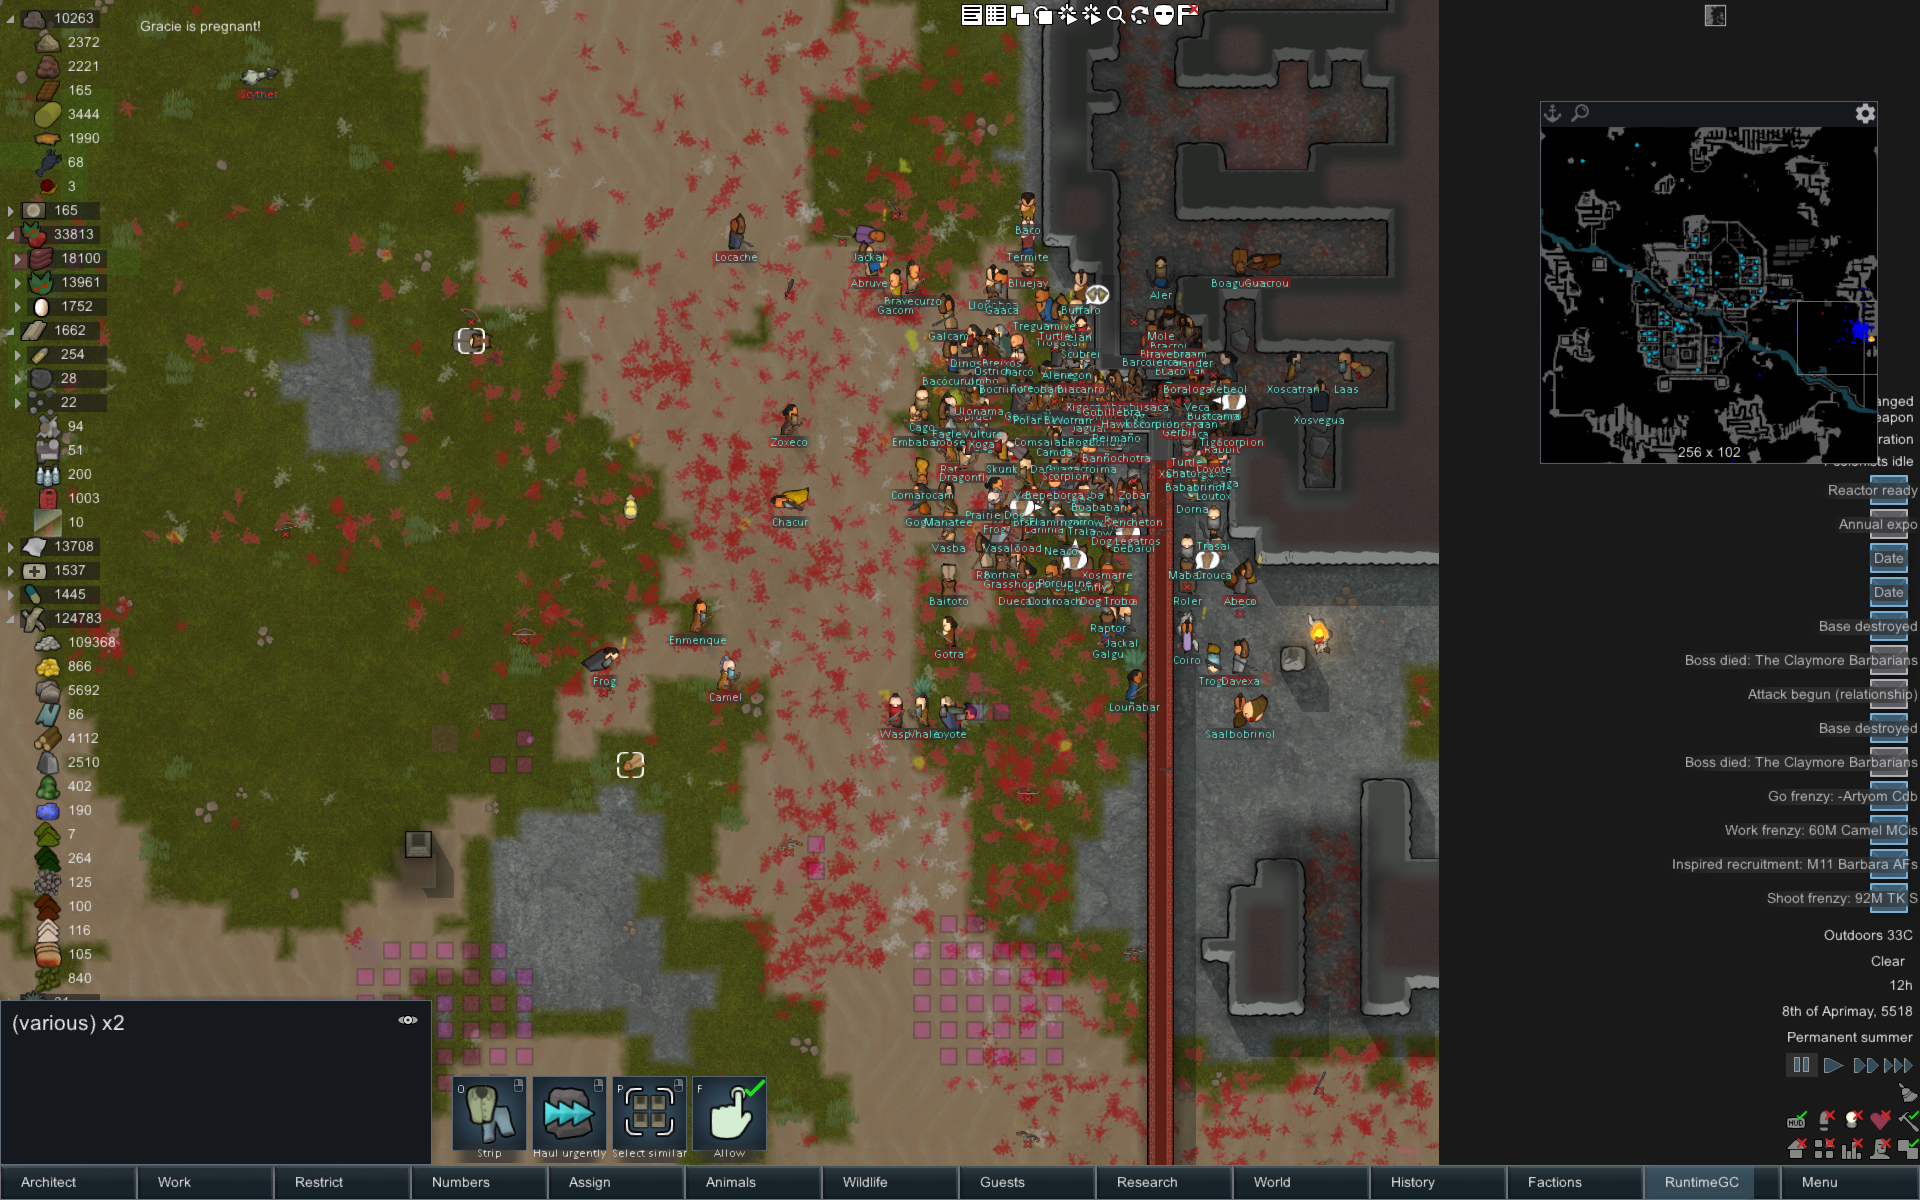 Allies dying horribly four days after they arrived --too late for battle anyway. Rimworld 1.0